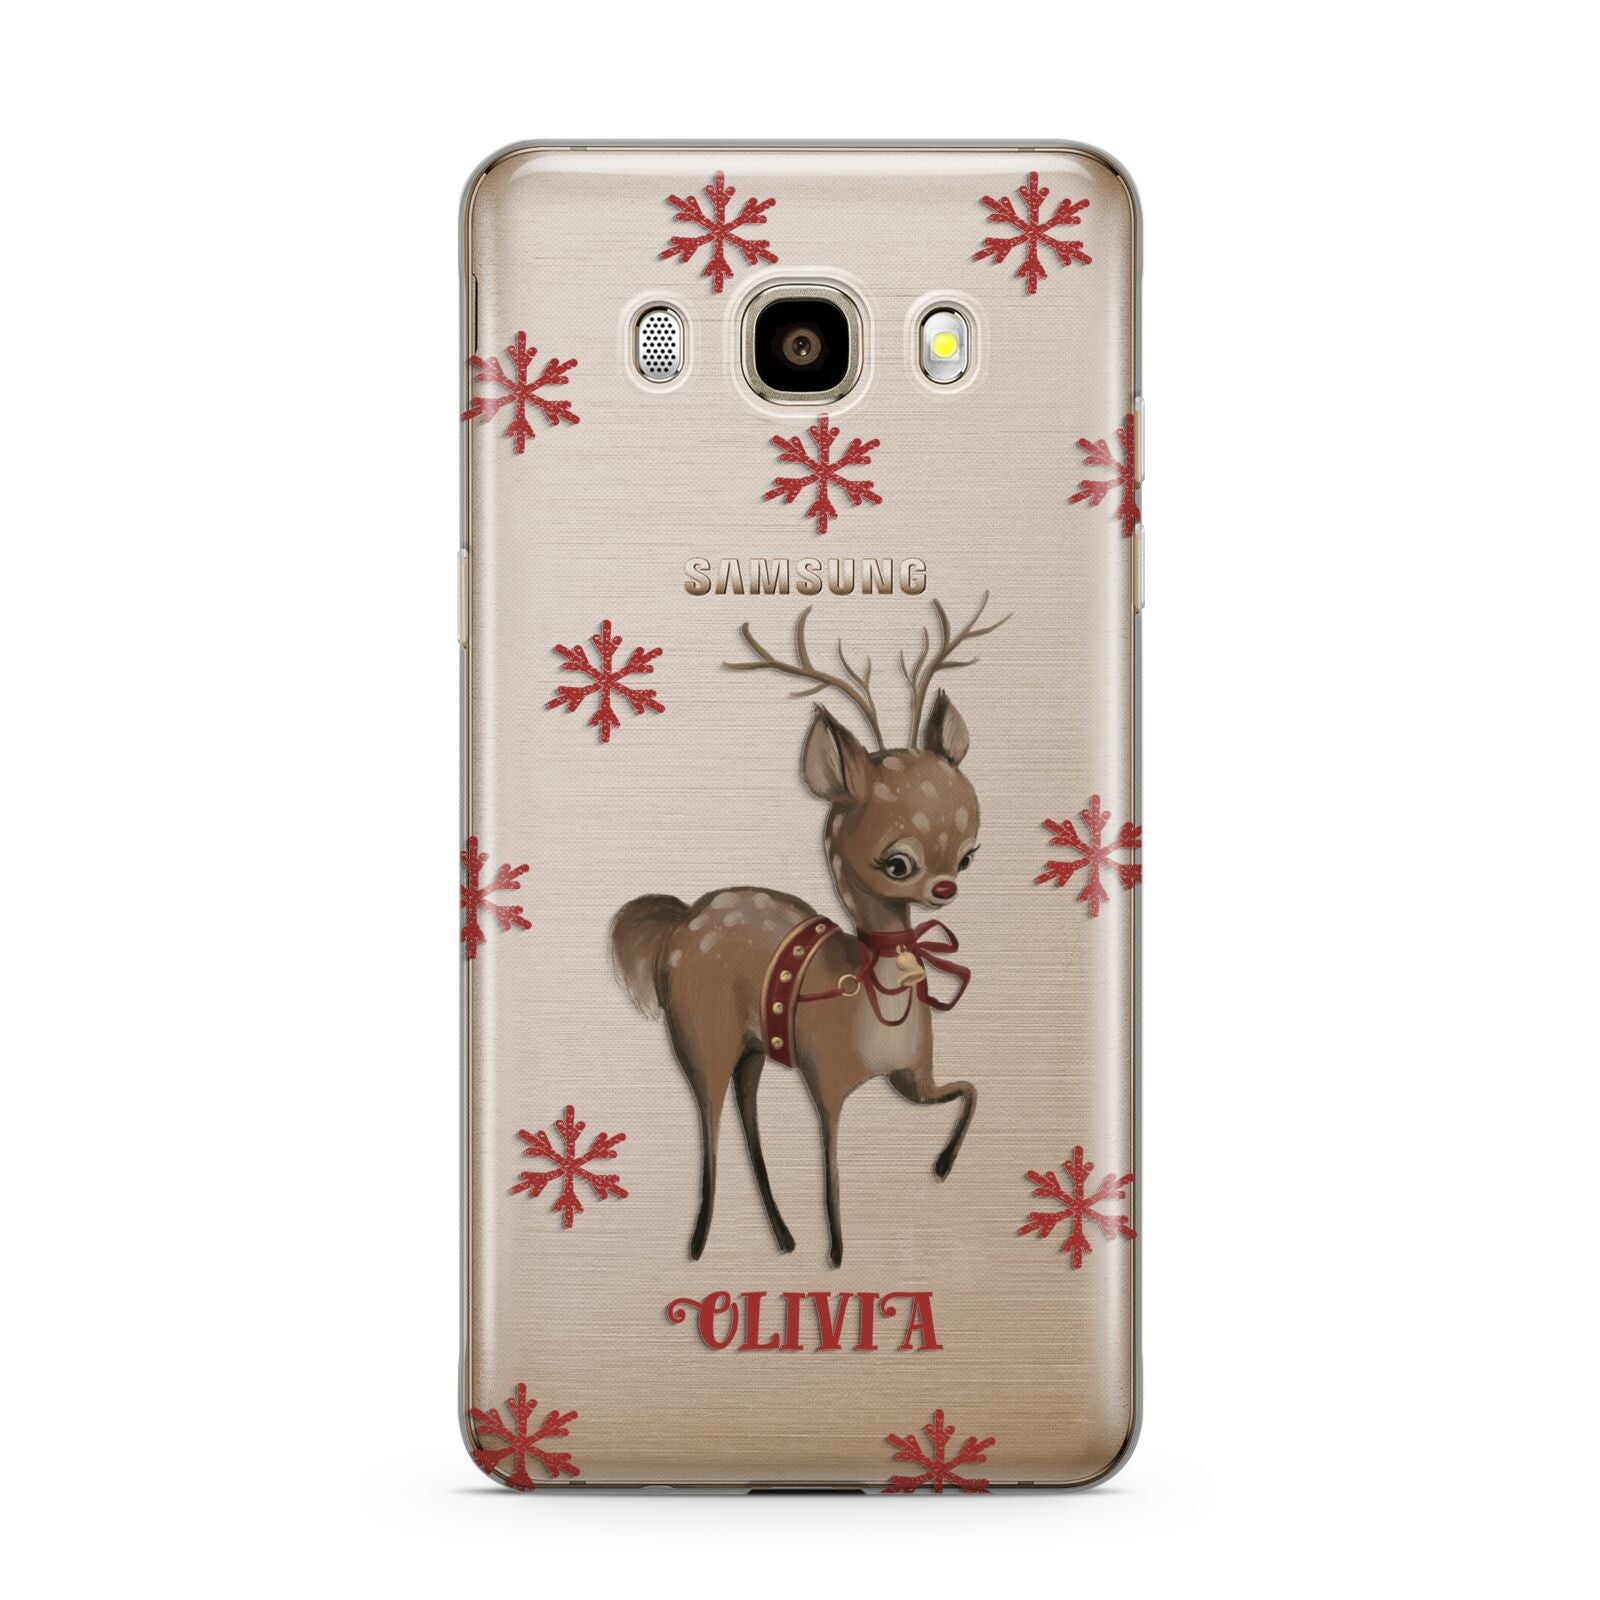 Rudolph Delivery Samsung Galaxy J7 2016 Case on gold phone